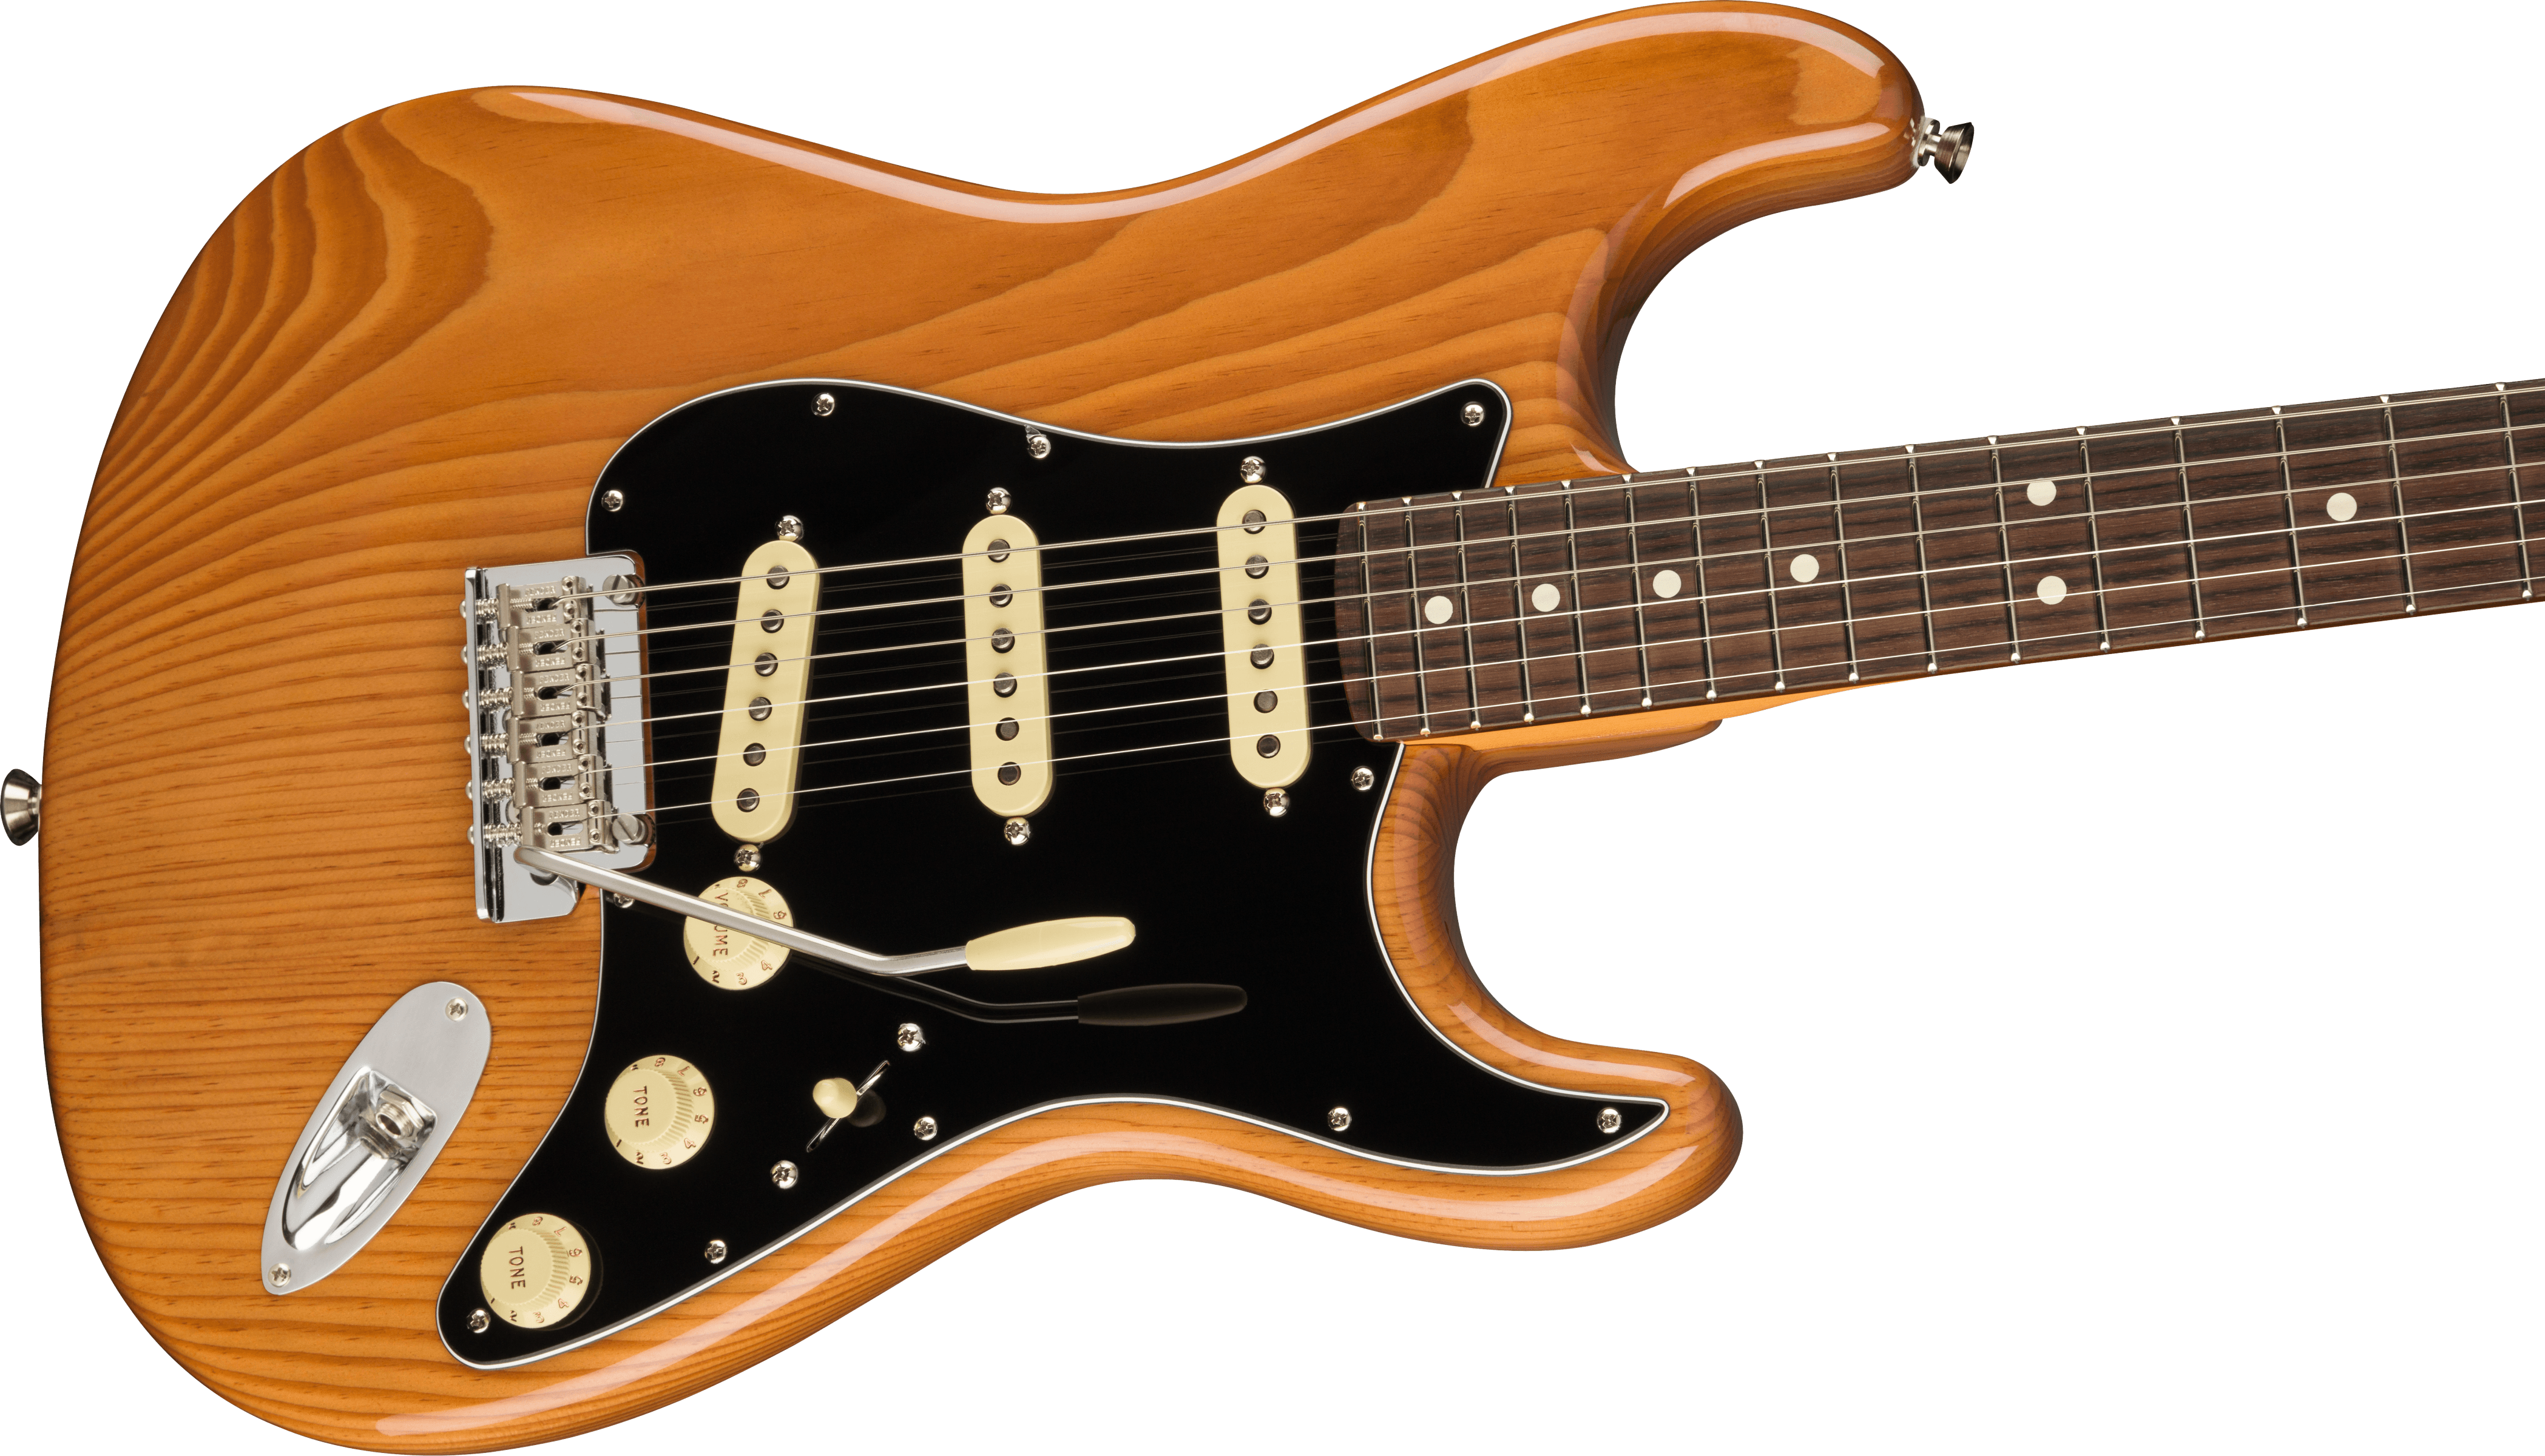 Fender American Professional II Stratocaster®, Rosewood Fingerboard, Roasted Pine